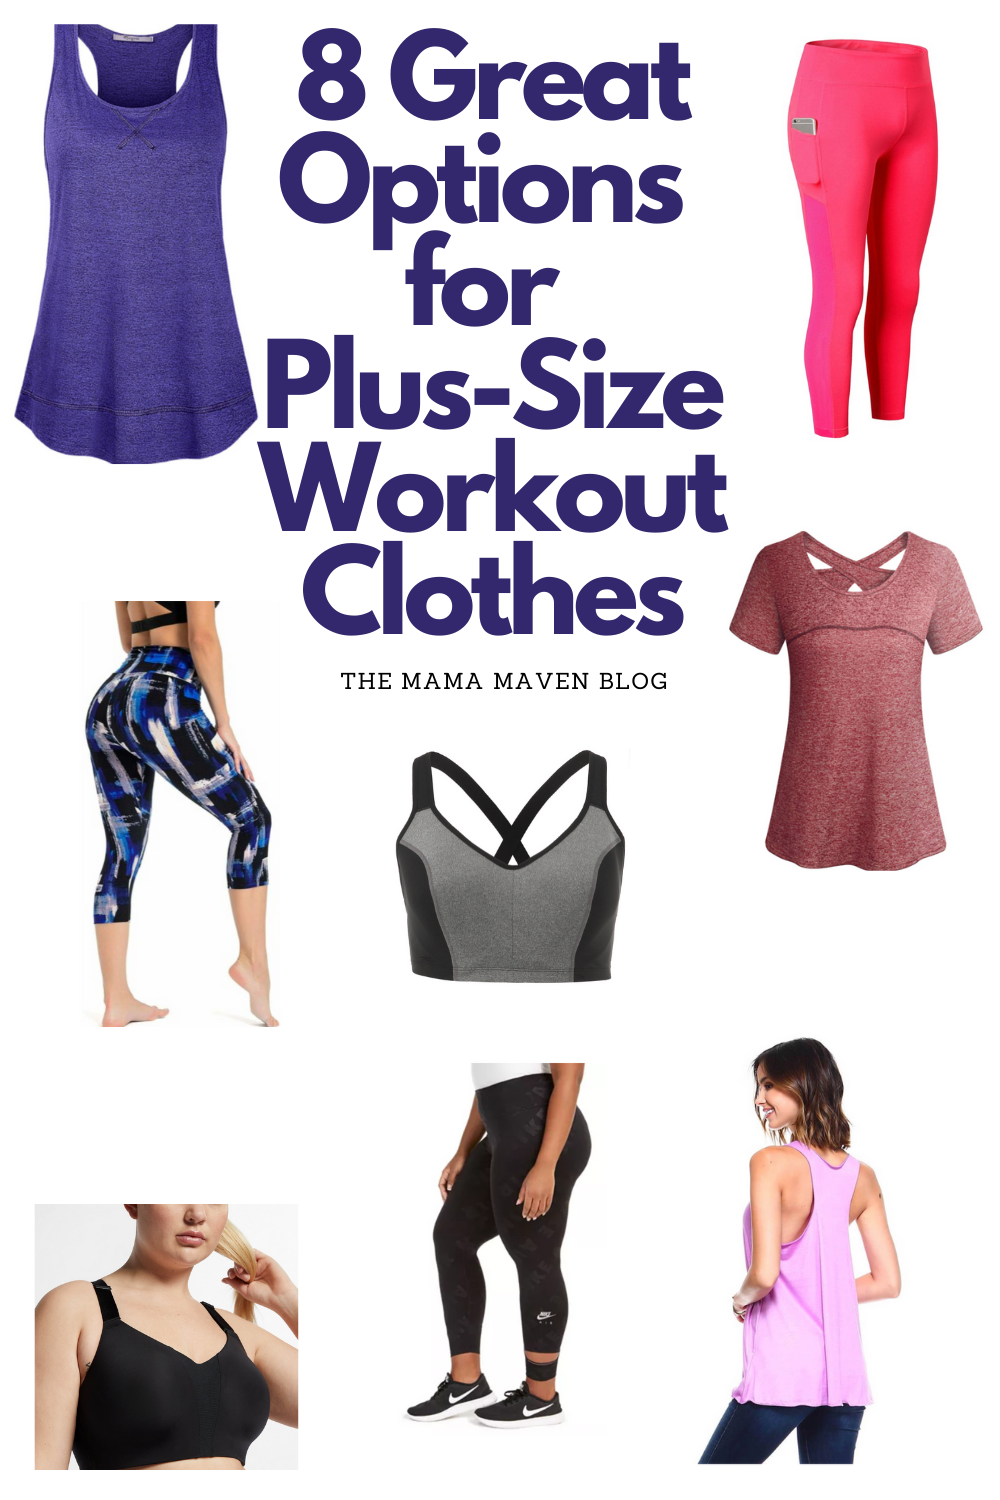 8 Great Options for Plus Size Workout Clothes - The Mama Maven Blog